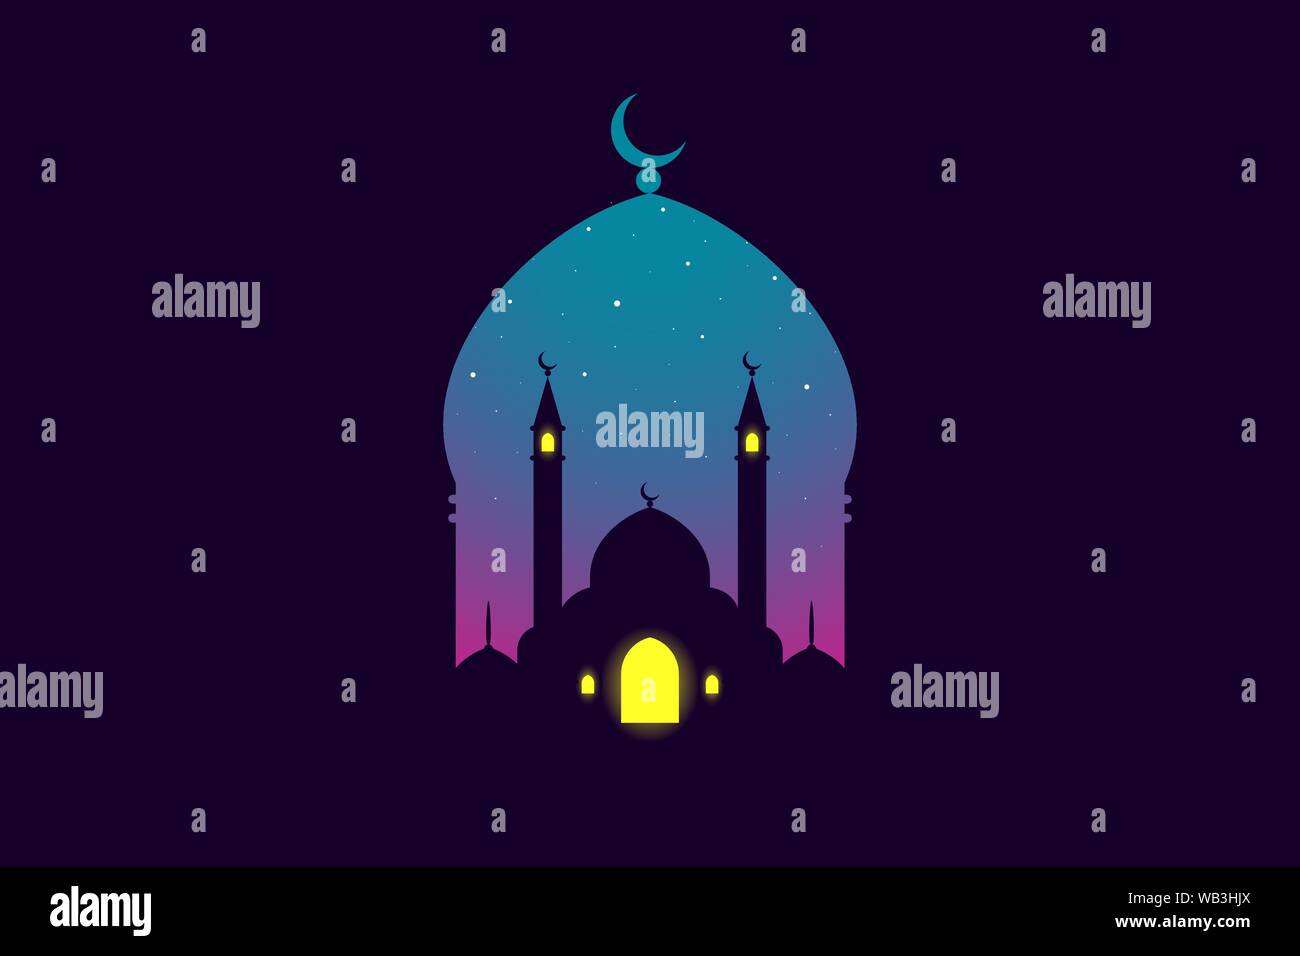 Mosque Silhouette In Night Sky With Moon And Abstract Light For Islam